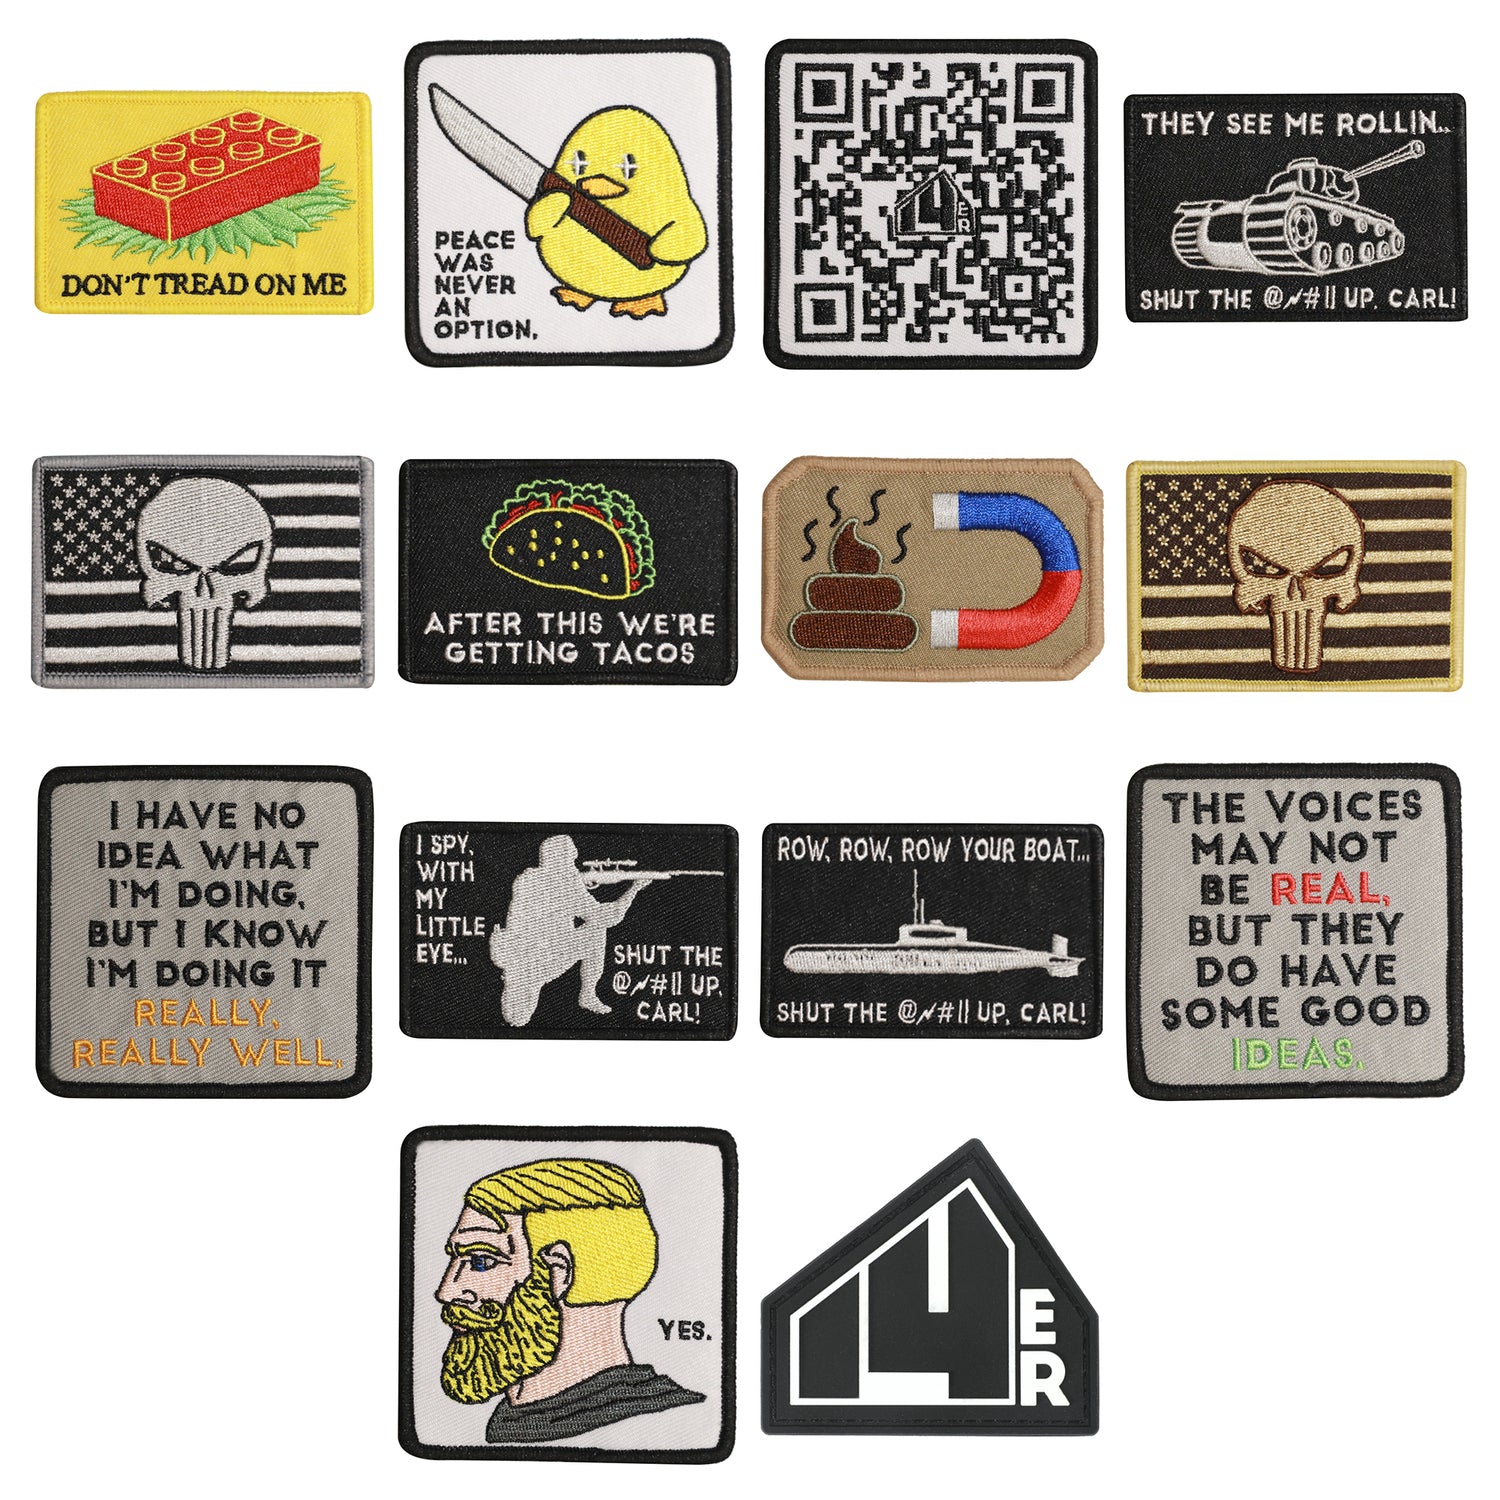 Patches Army Patch, Velcro Patches, Tactical Patches,Velcro Patch